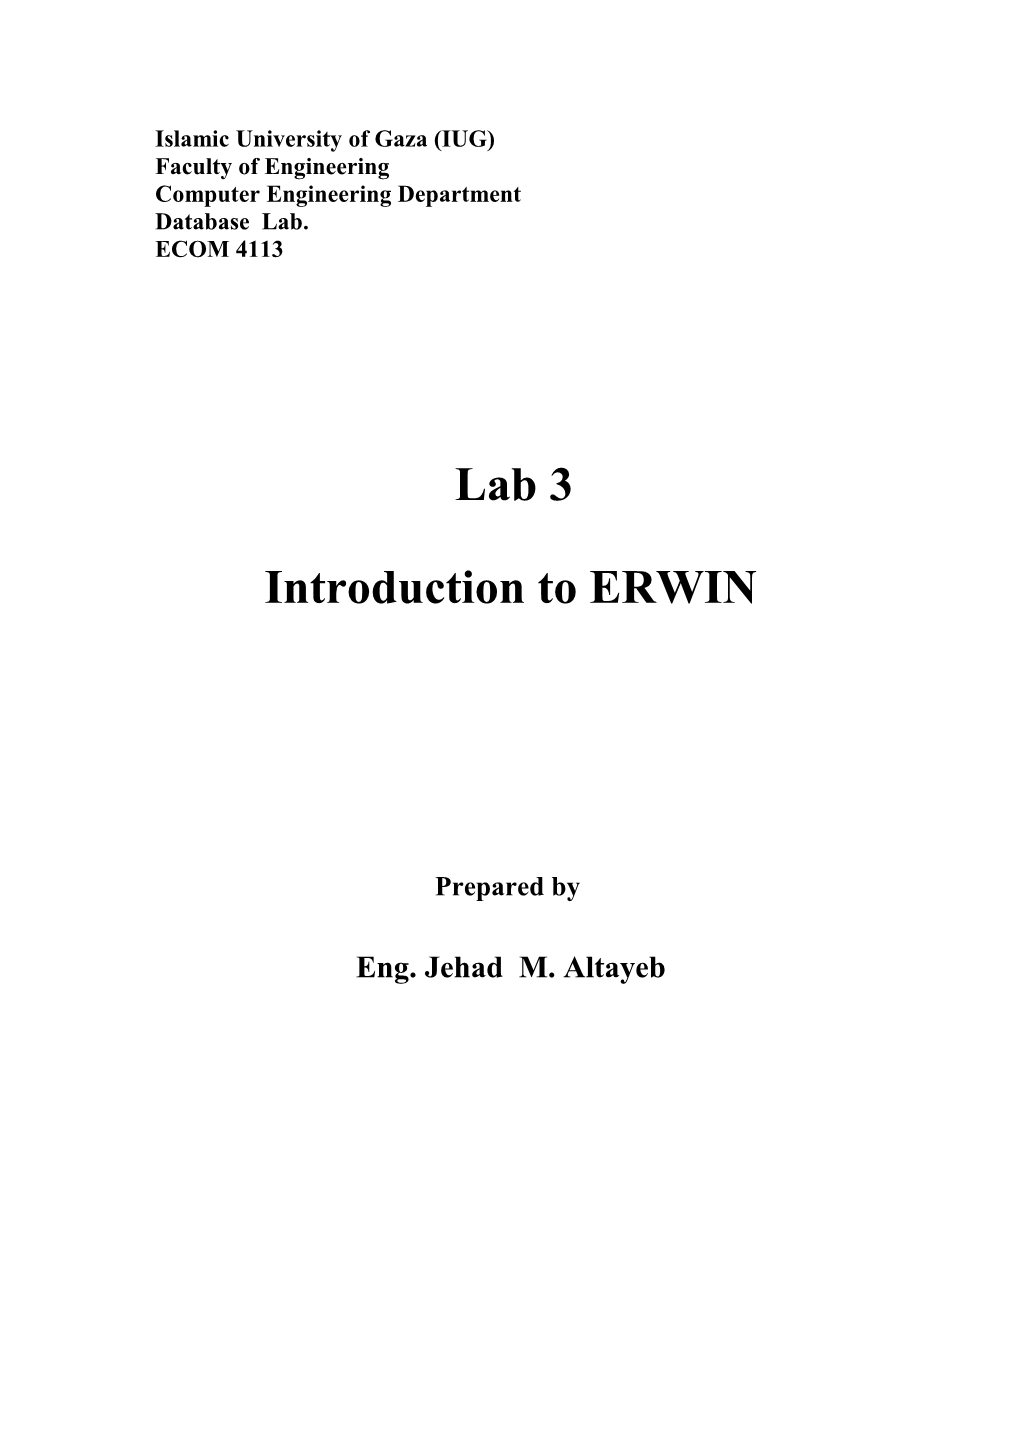 This Lab Introduces Erwin, a Popular Data Modeling Tool Used in the Industry